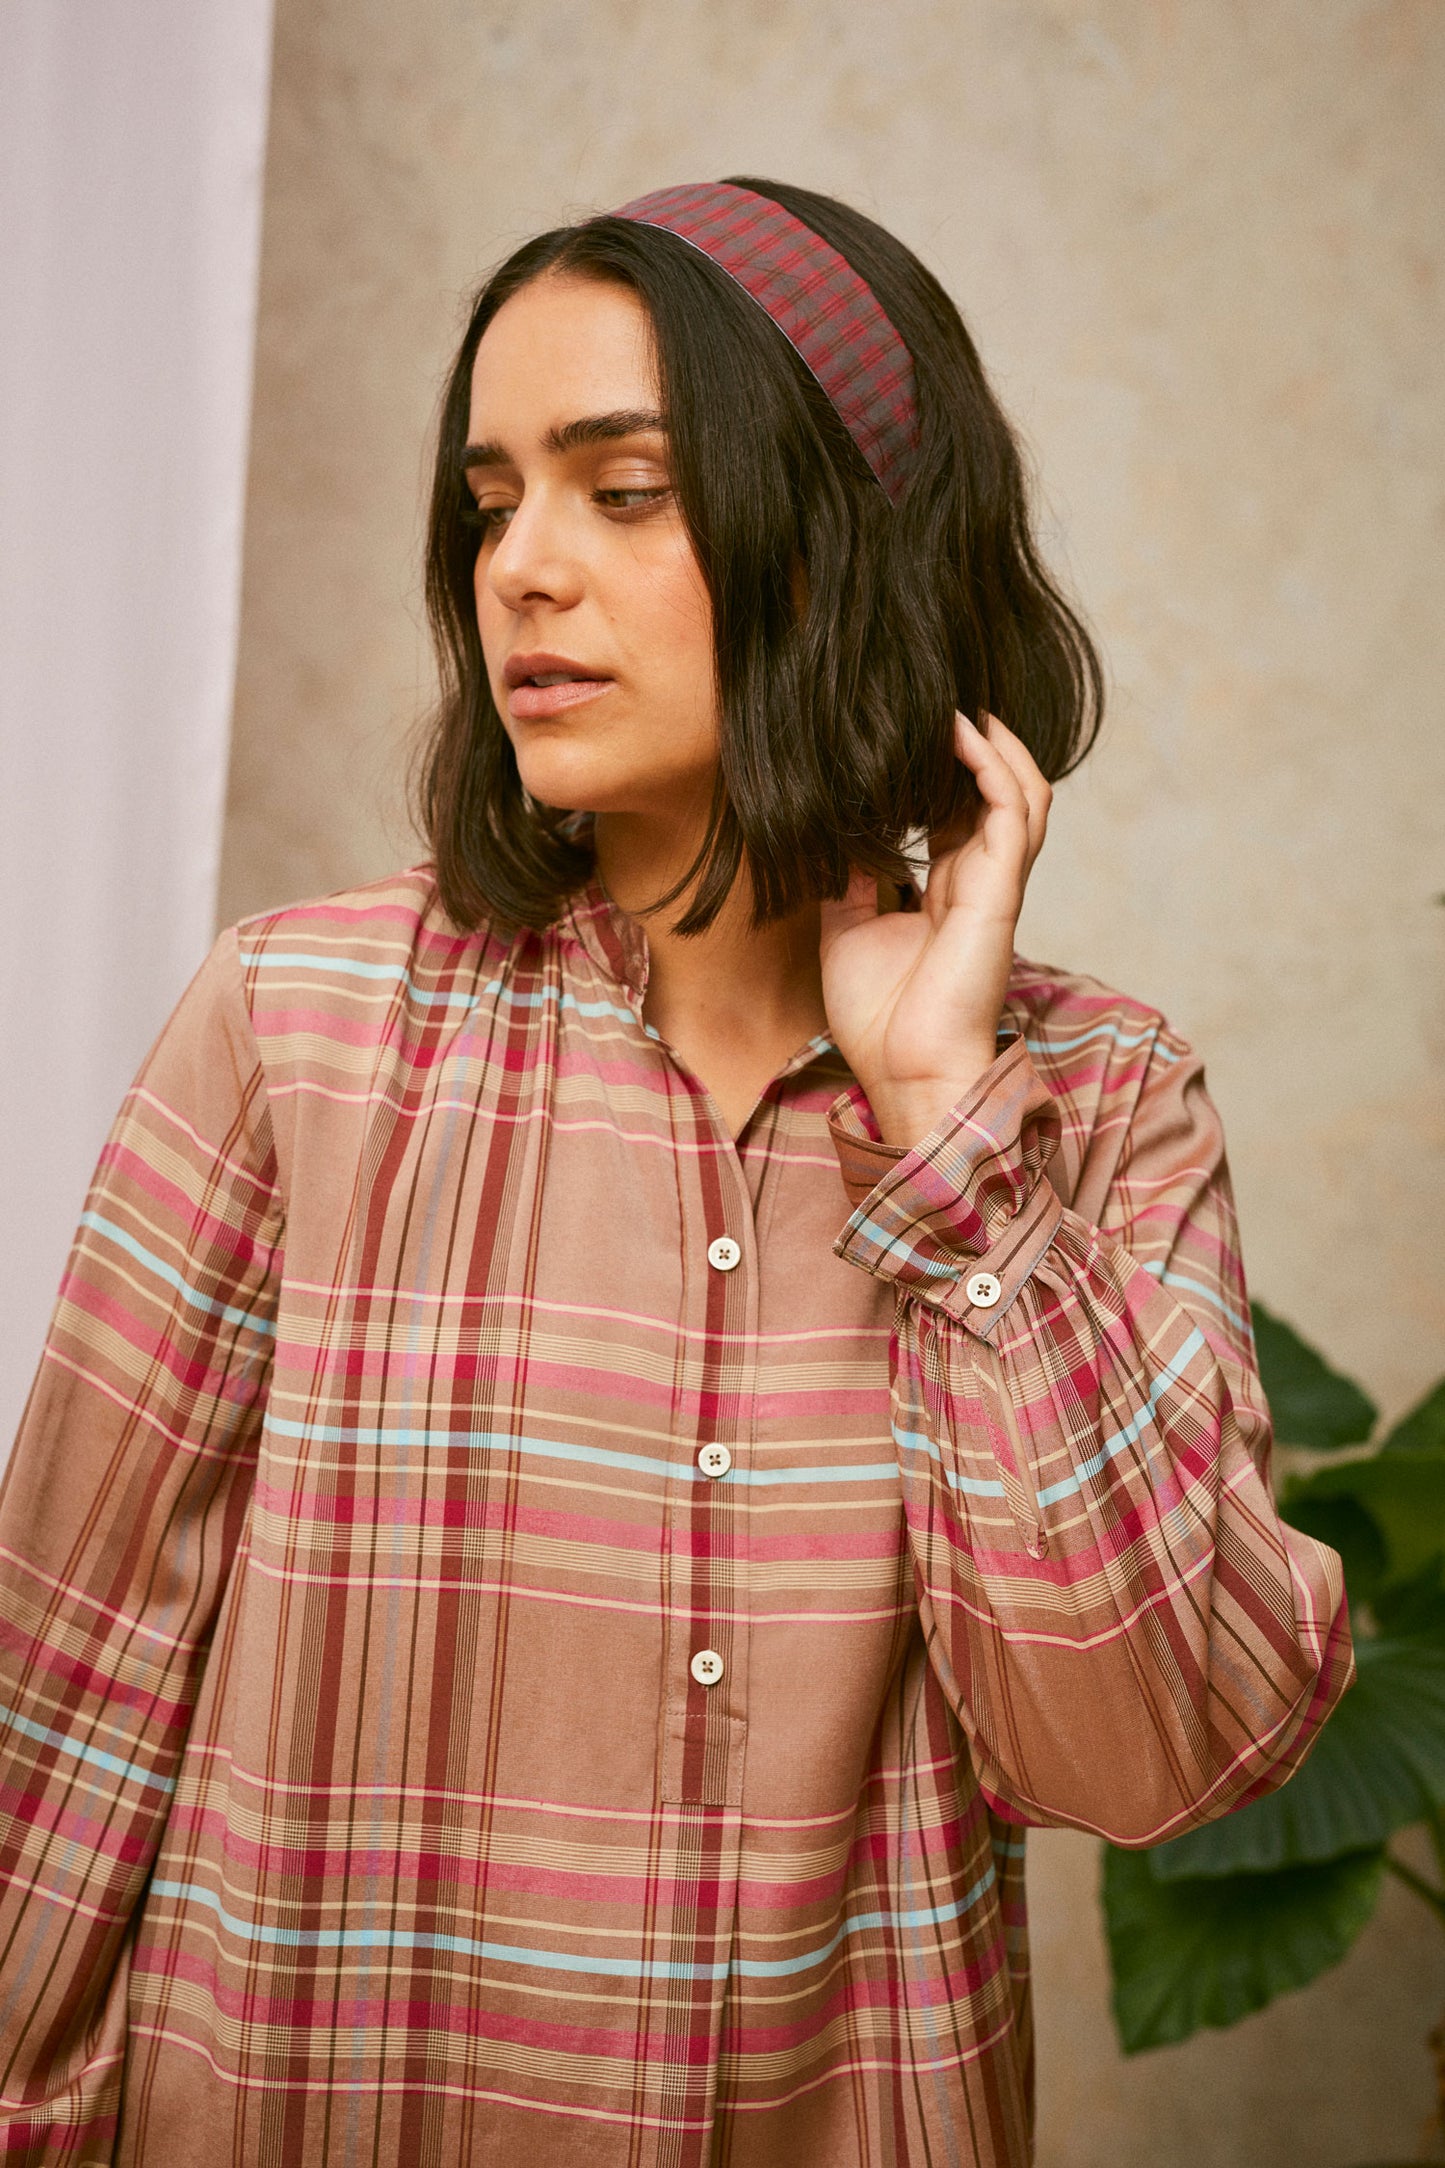 Model stands, with one hand to her head. She wears Saywood's pink check shirt, with the red check Heidi Headband worn in her her. A plant and drop of pink fabric can be seen in the background. 